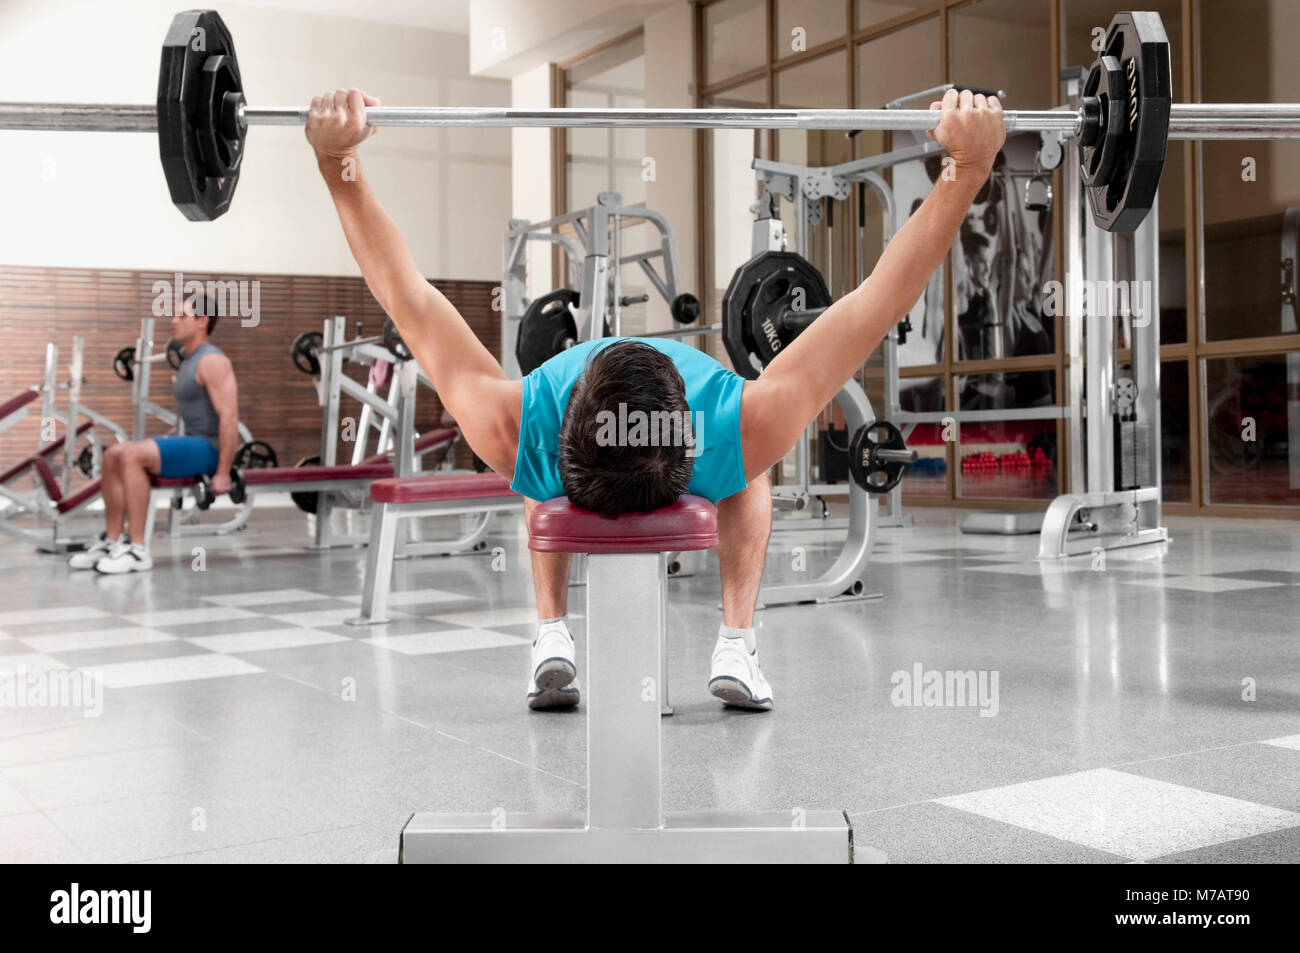 Two men exercising in a gym Stock Photo